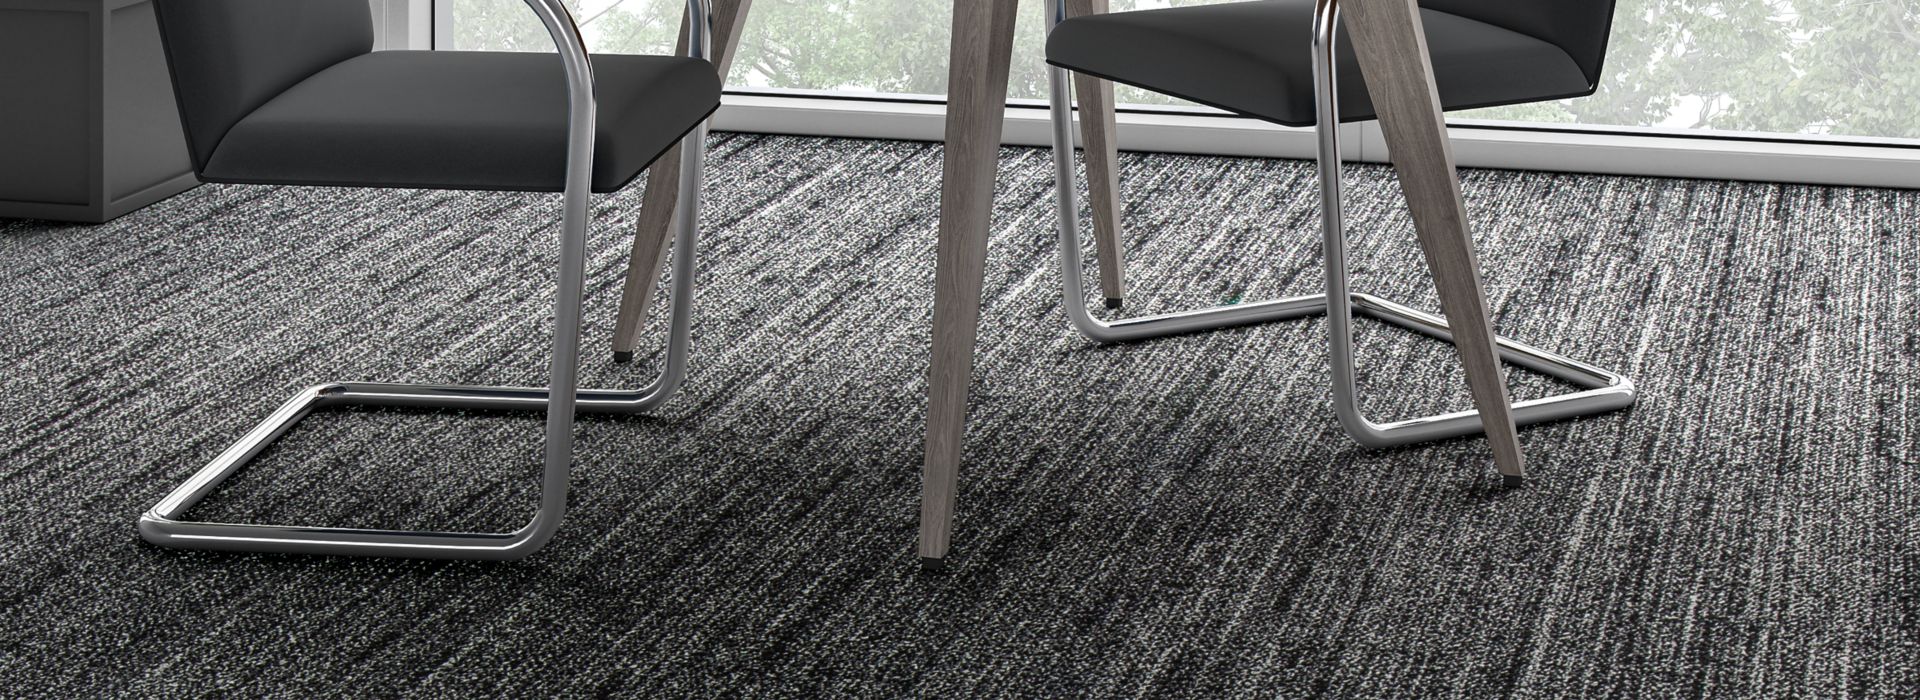 Interface WW870 plank carpet tile shown with small table and chairs Bildnummer 1